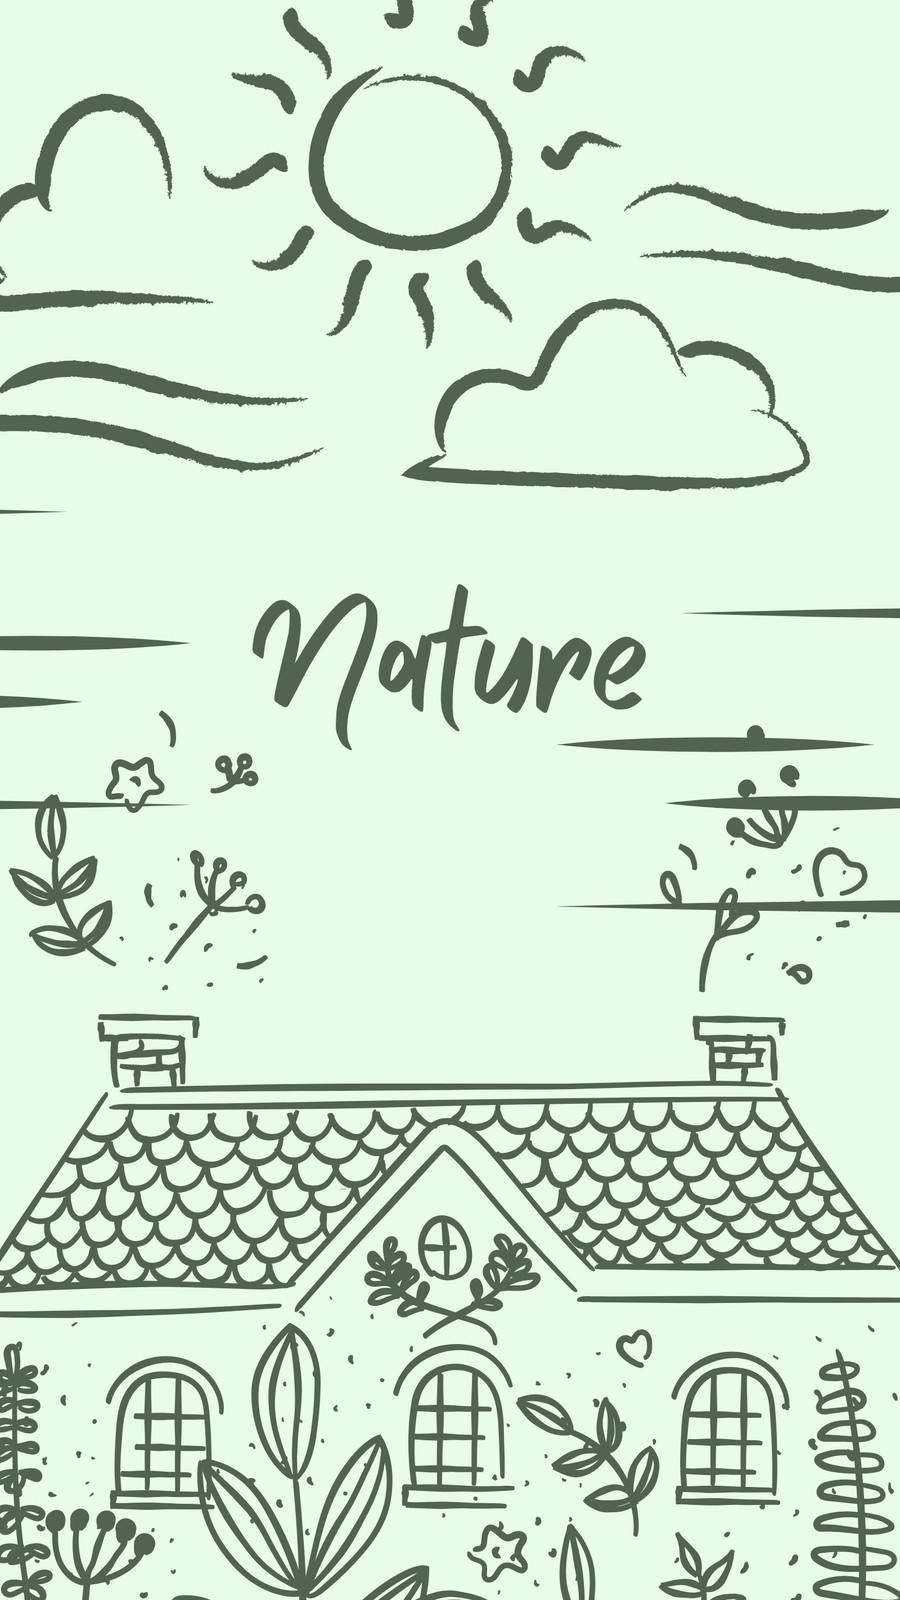 Nature line art Images - Search Images on Everypixel